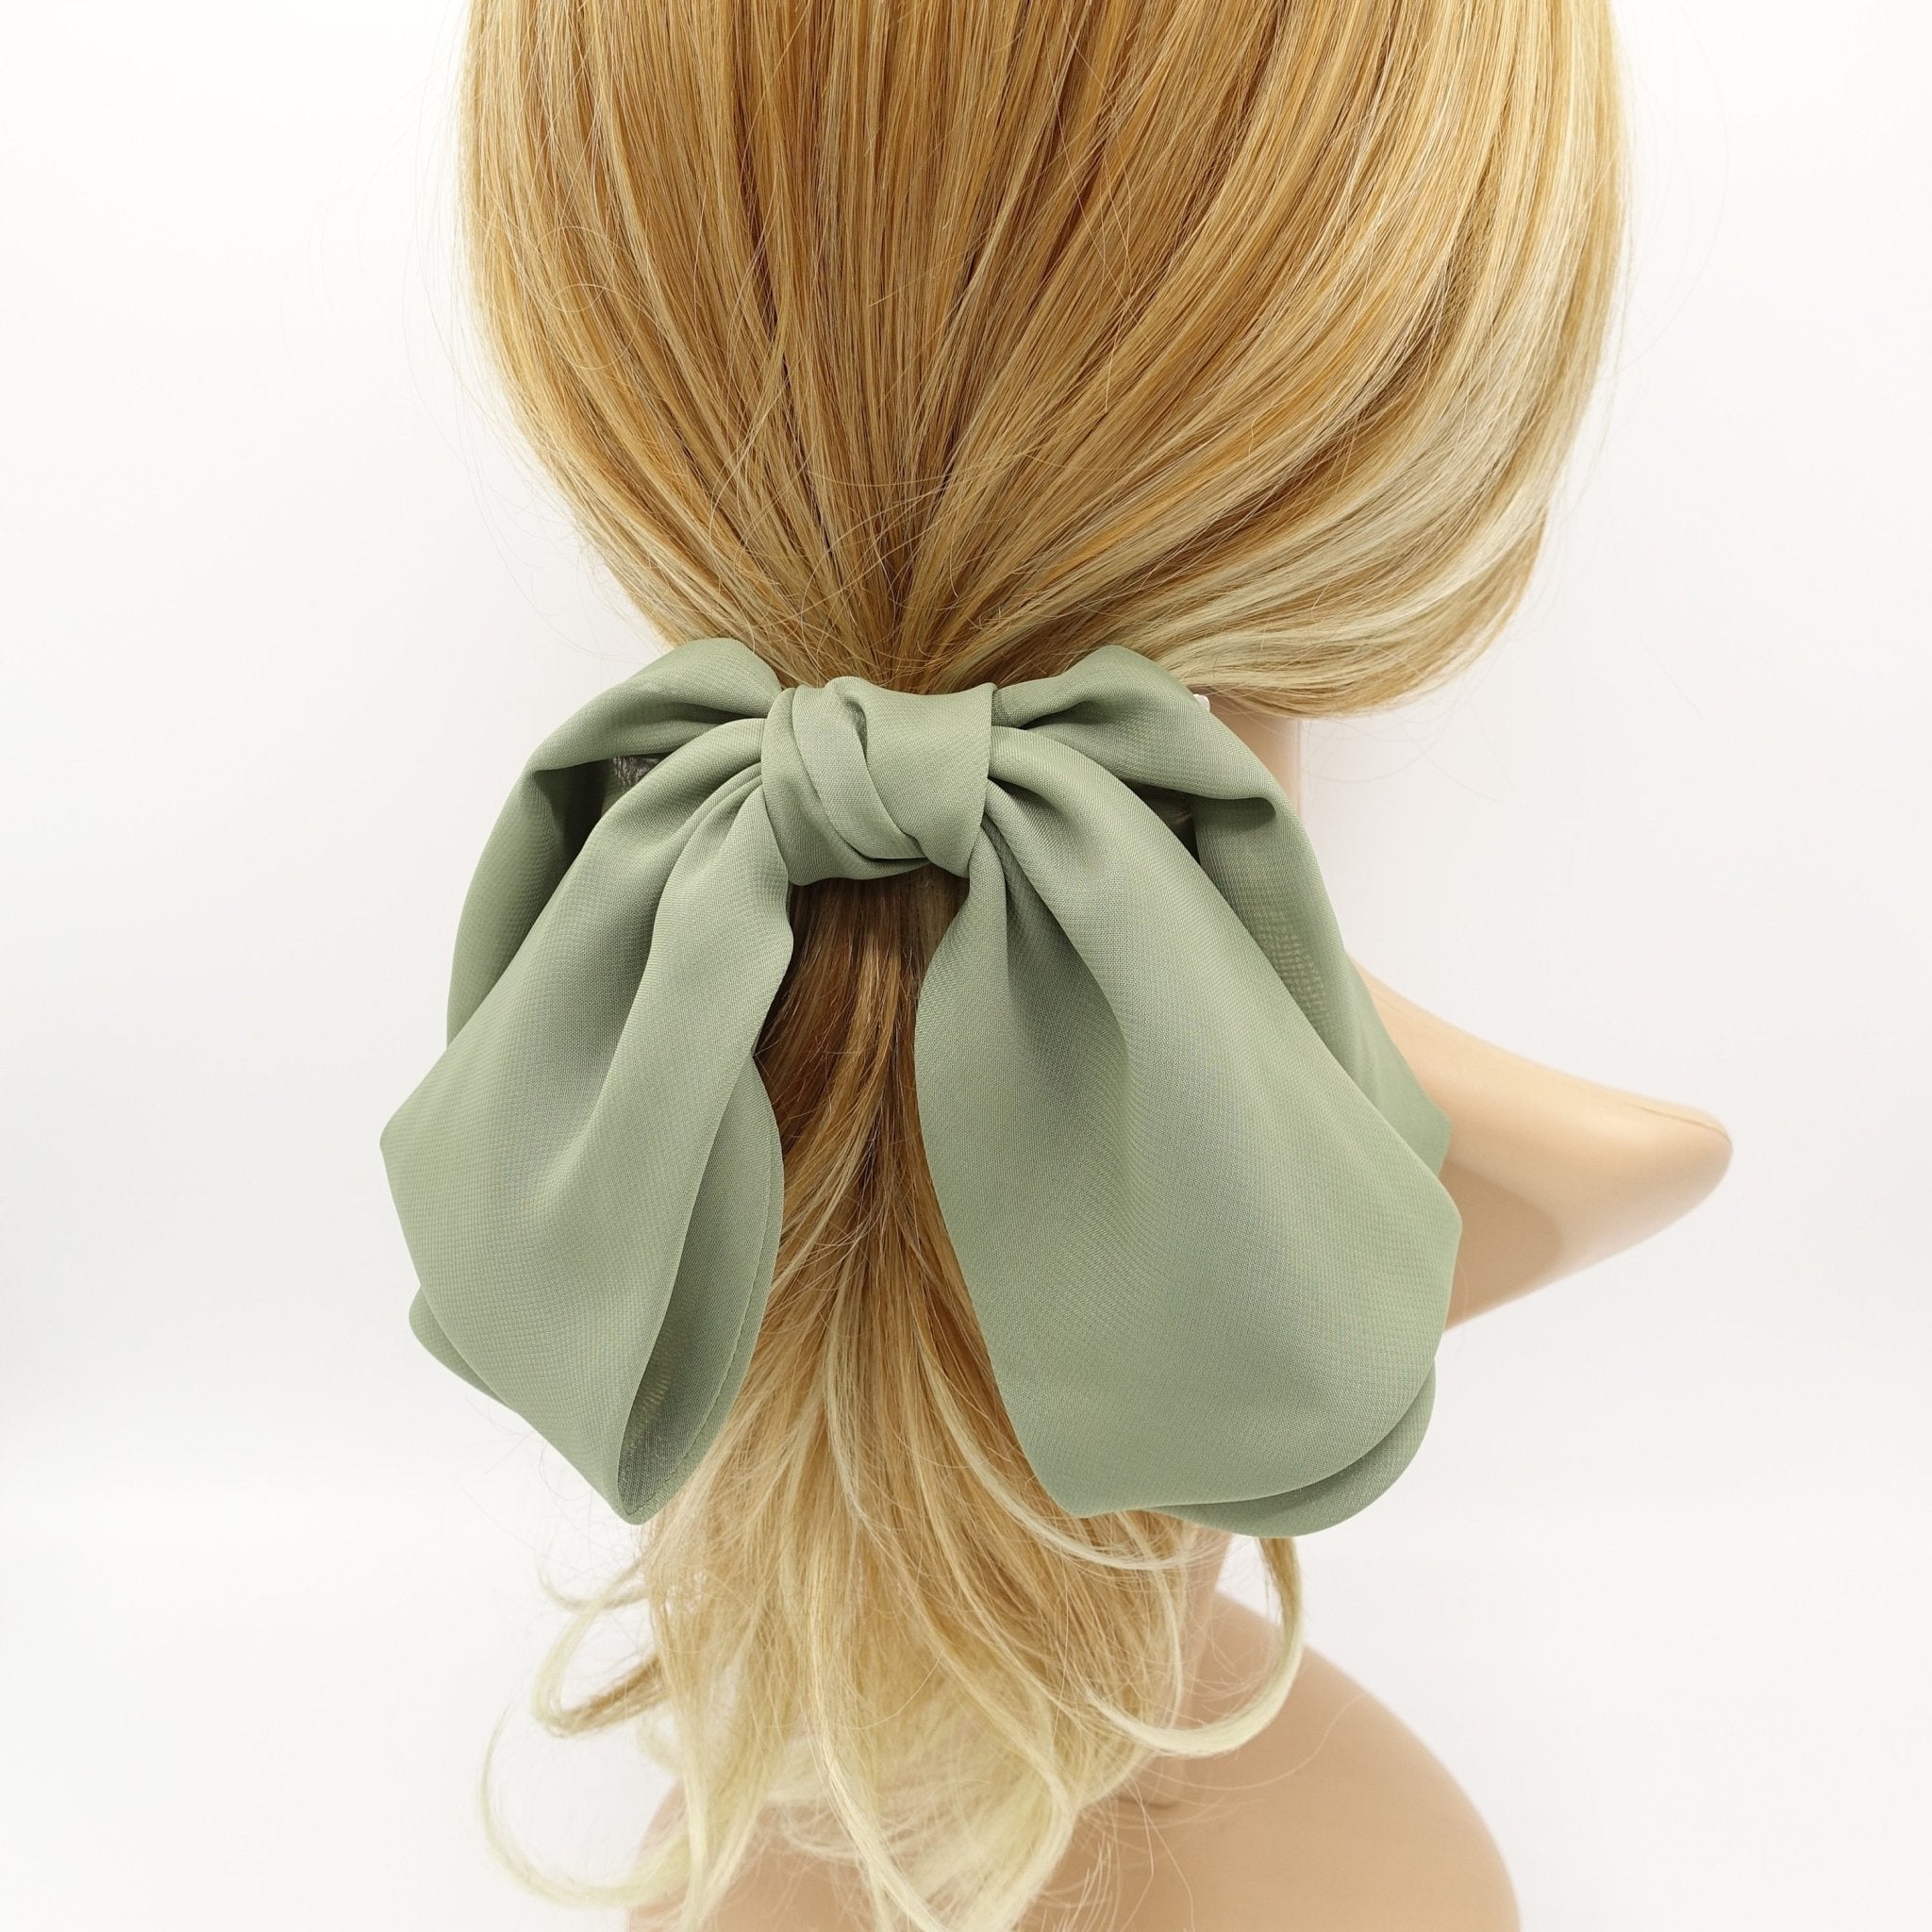 VeryShine claw/banana/barrette Sage green droopy chiffon hair bow double layered Spring Summer hair accessory for women